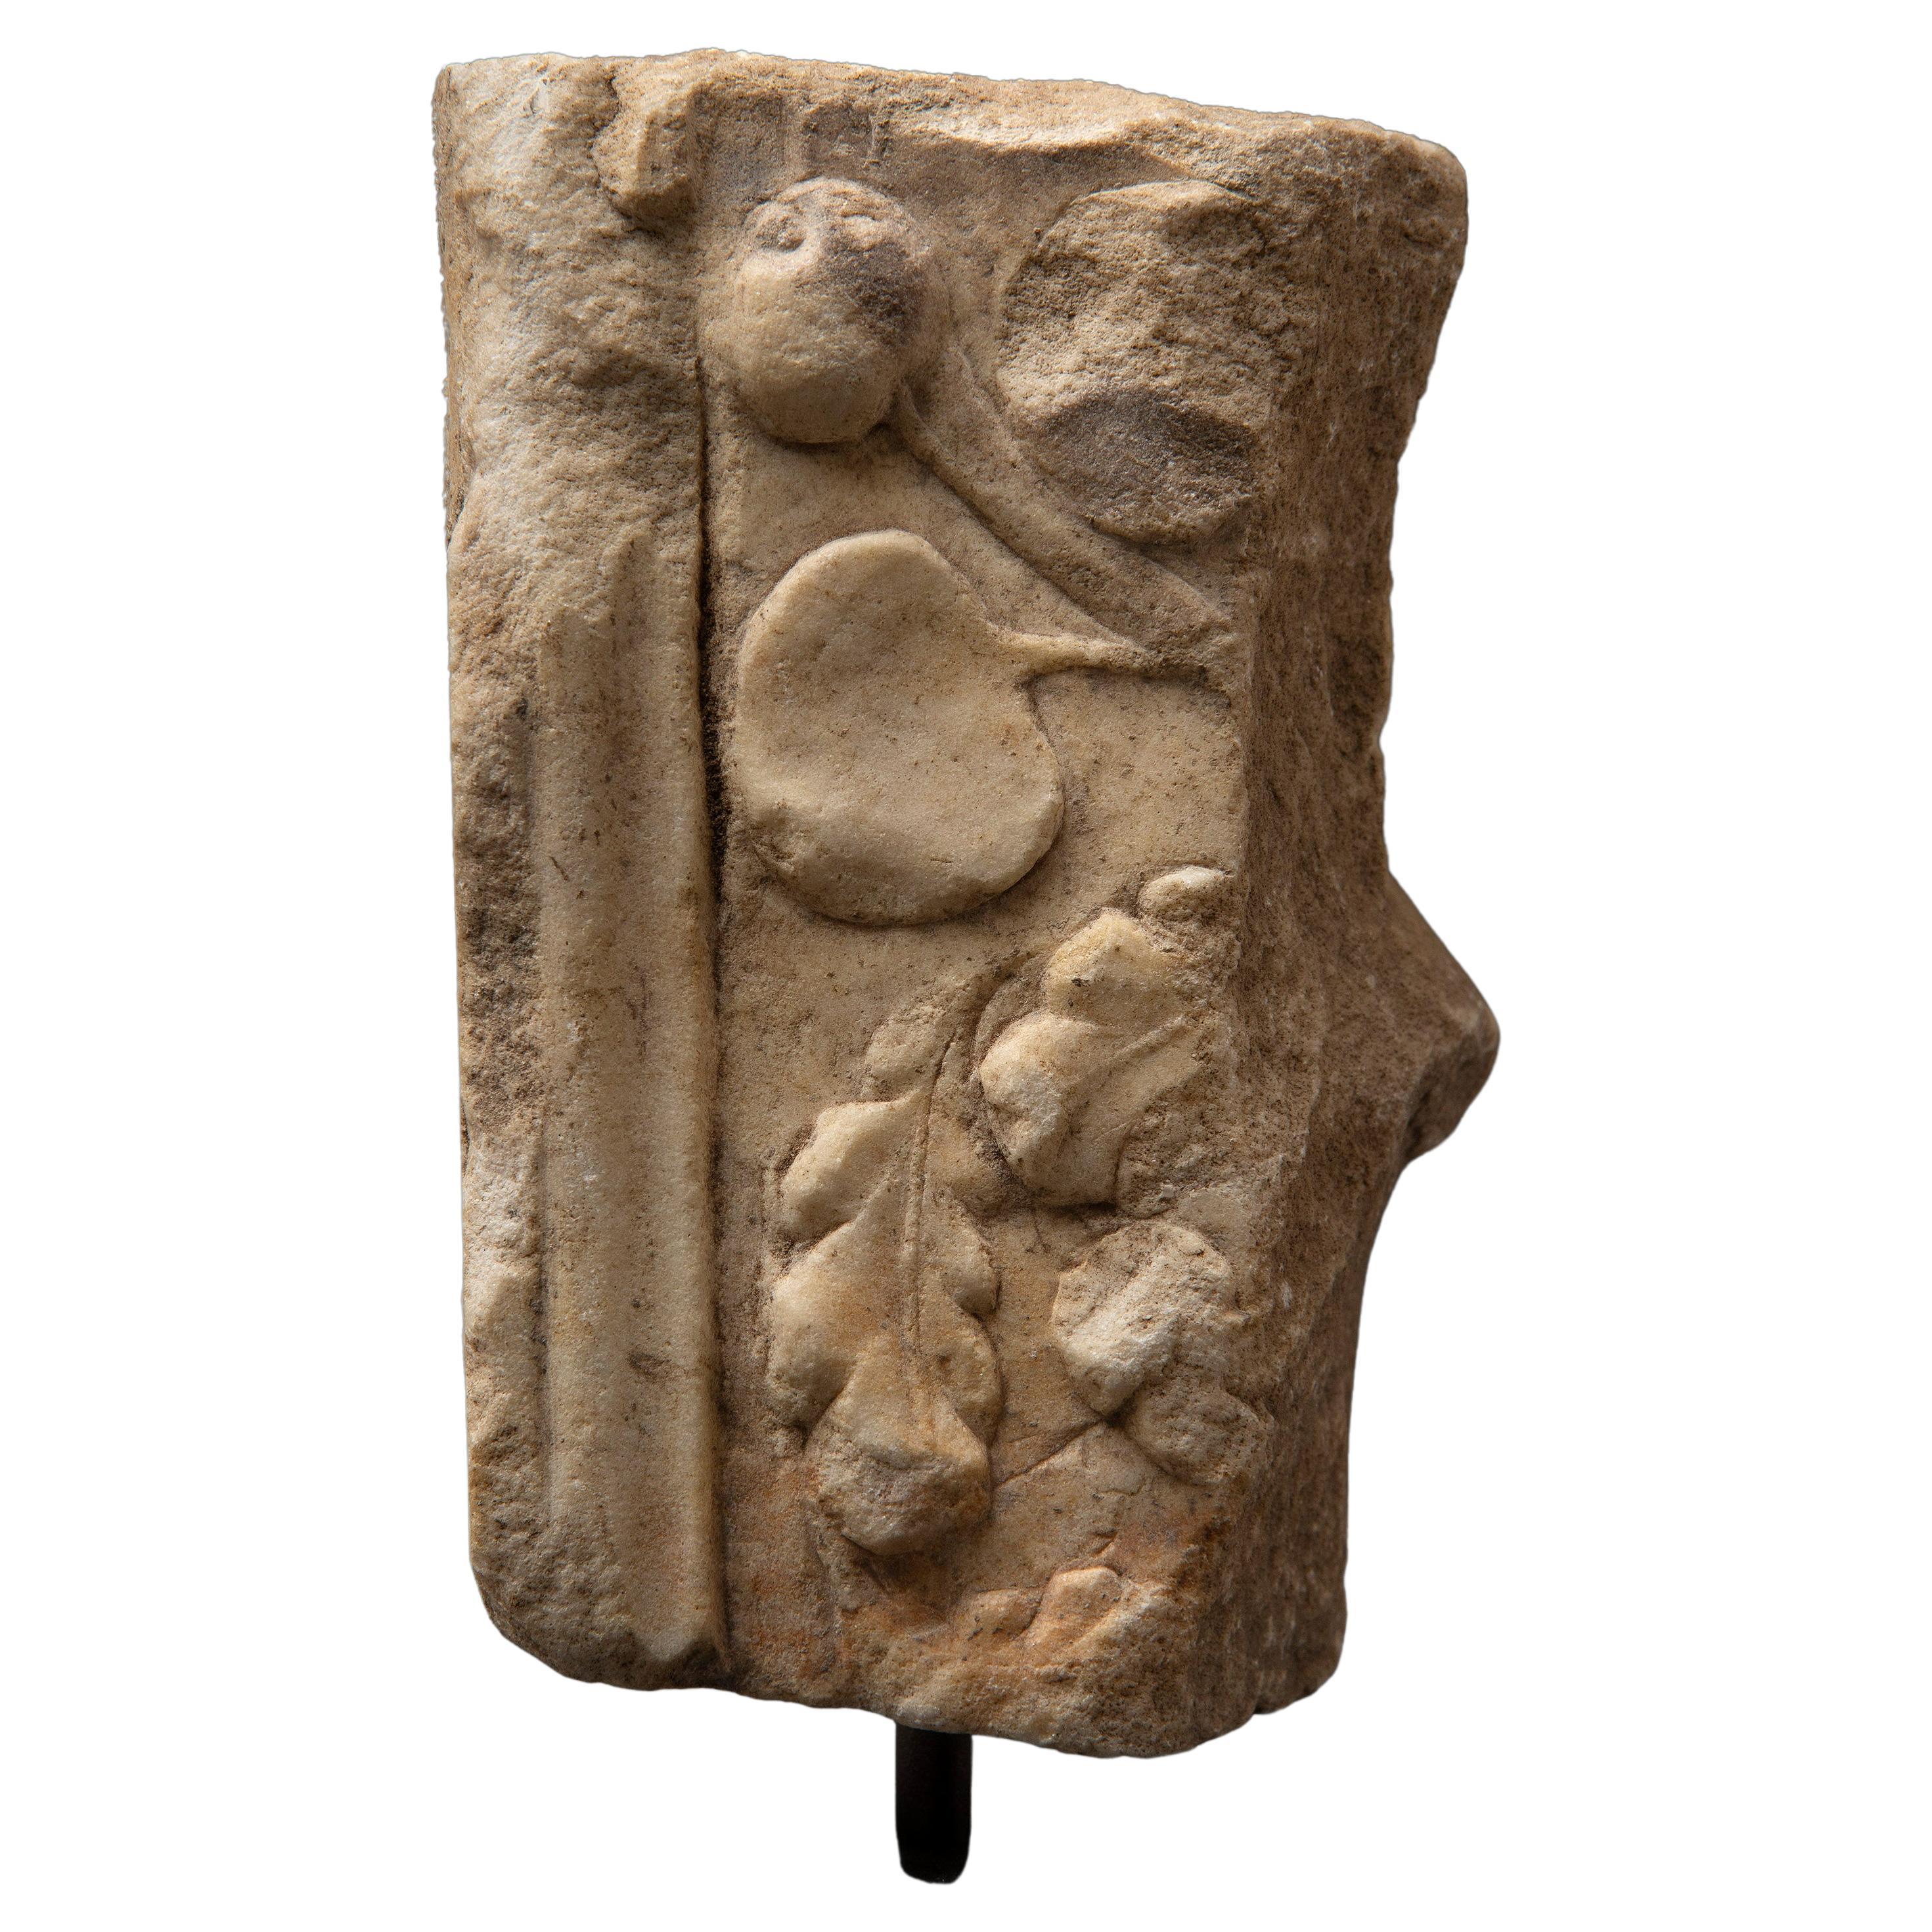 Roman Marble Architectural Decoration - 1st / 2nd century AD